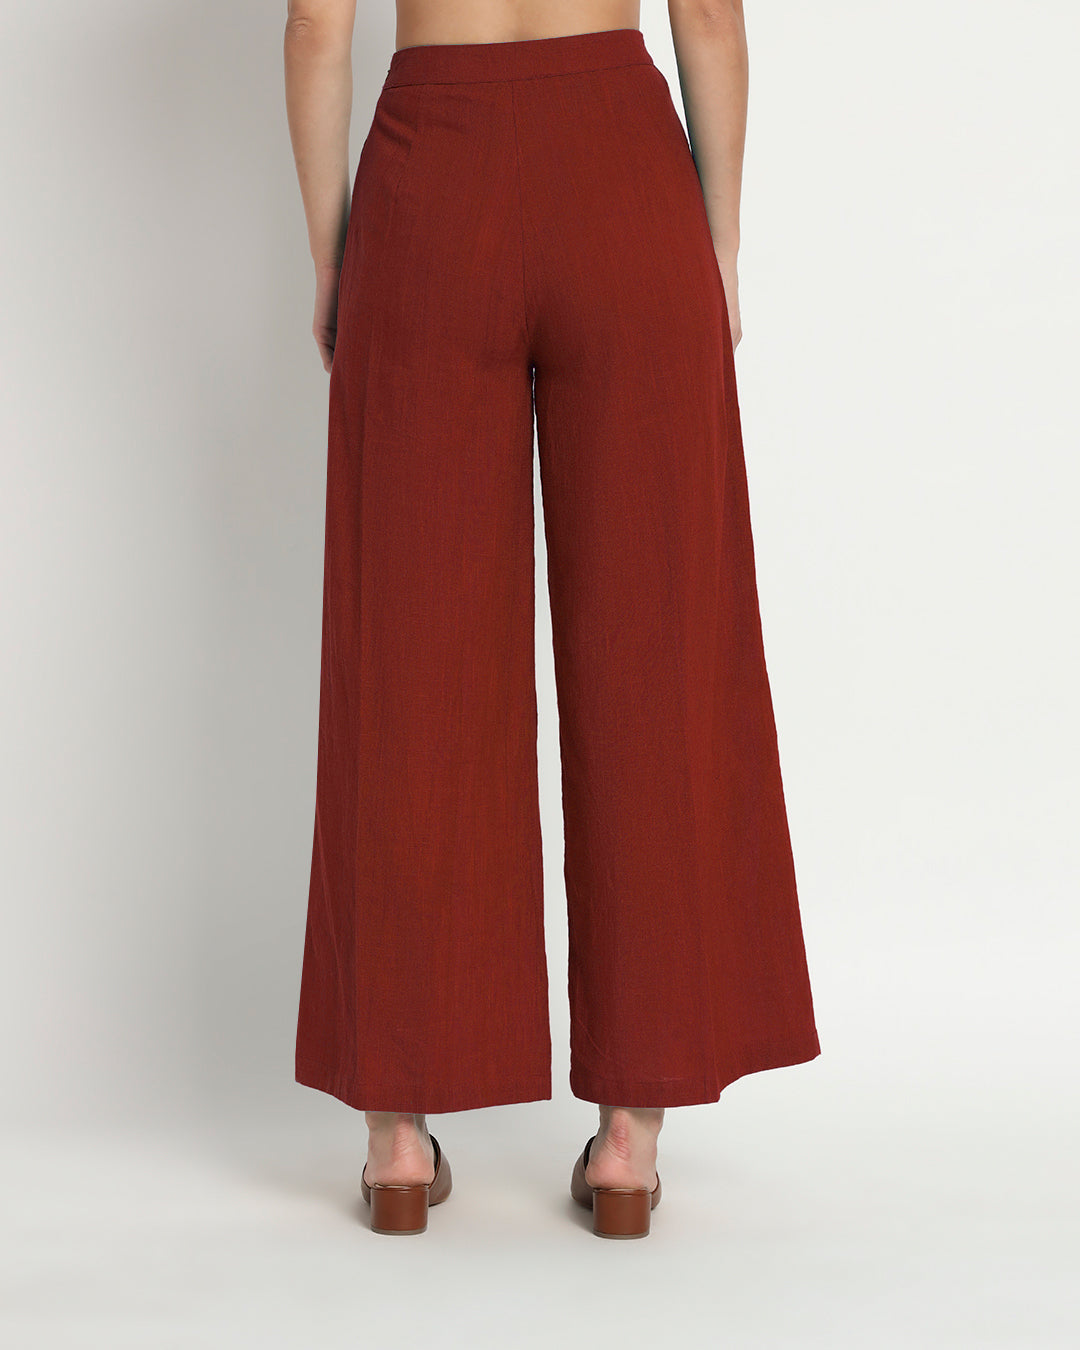 Russet Red Dreamy Flare Spaghetti Solid Co-ord Set